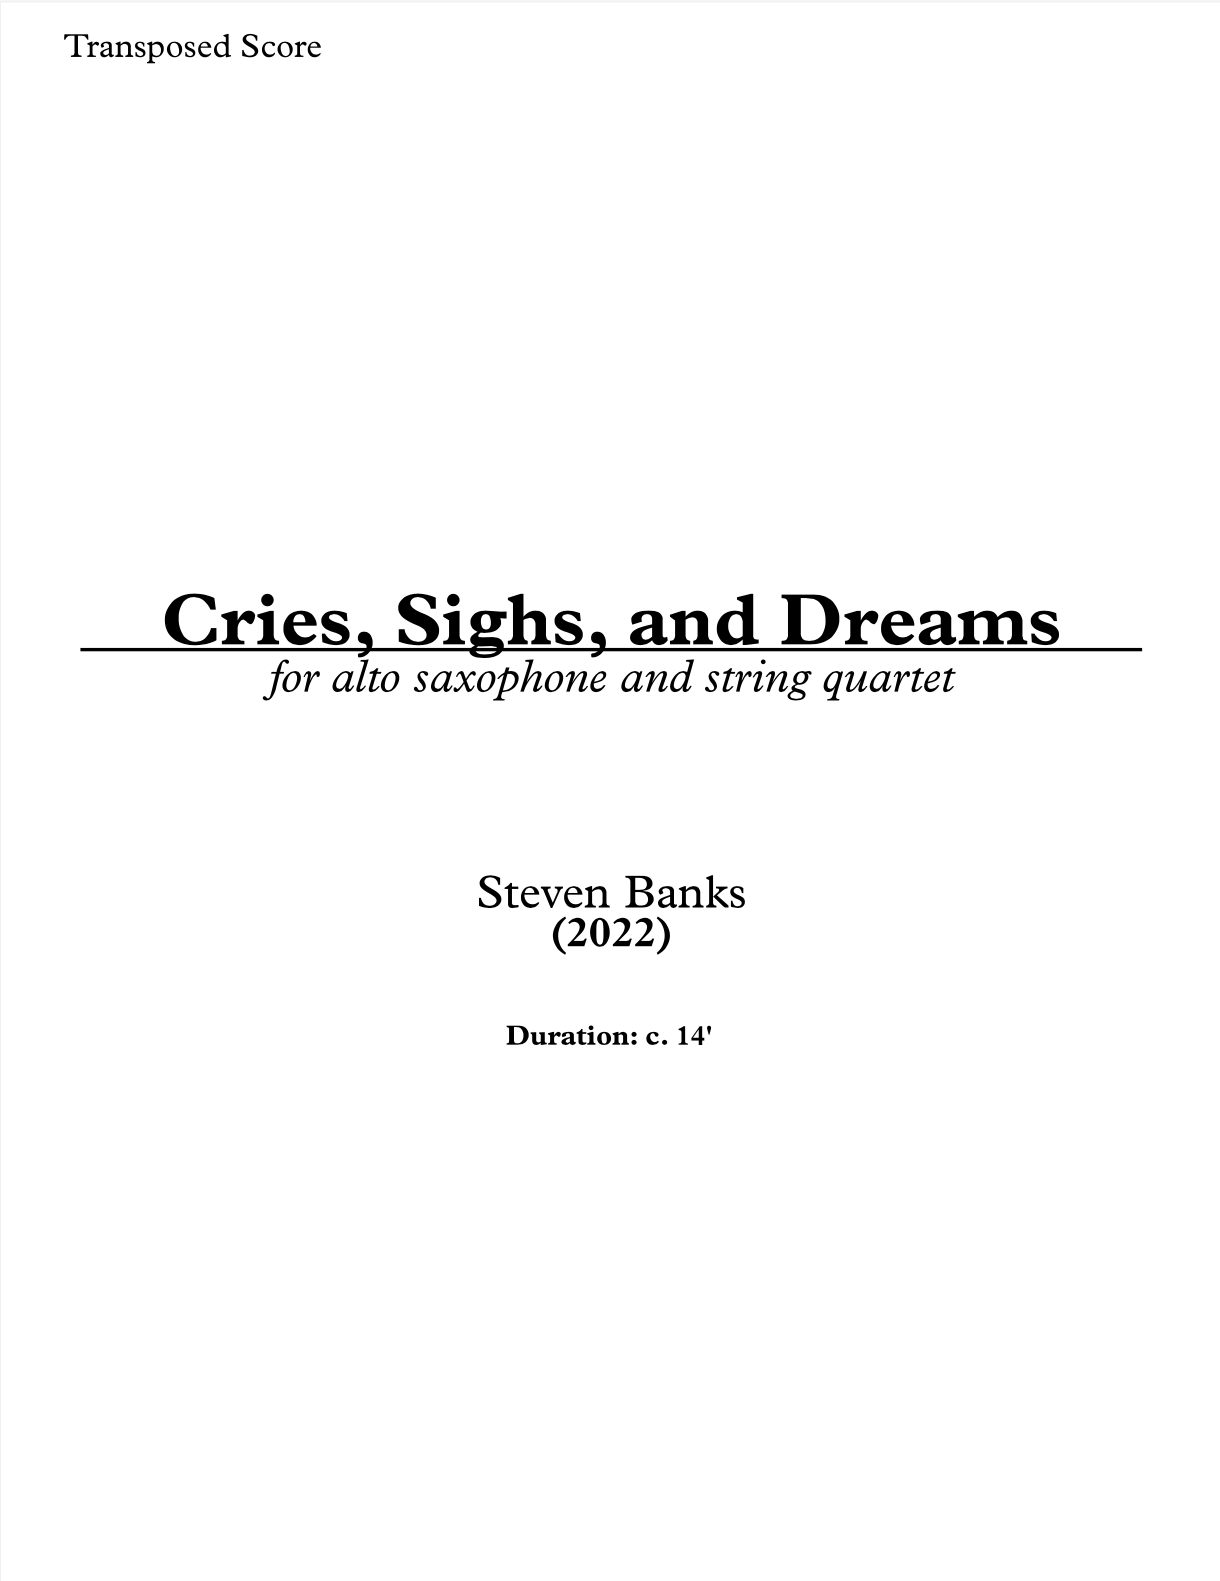 Cries, Sighs, And Dreams by Steven Banks